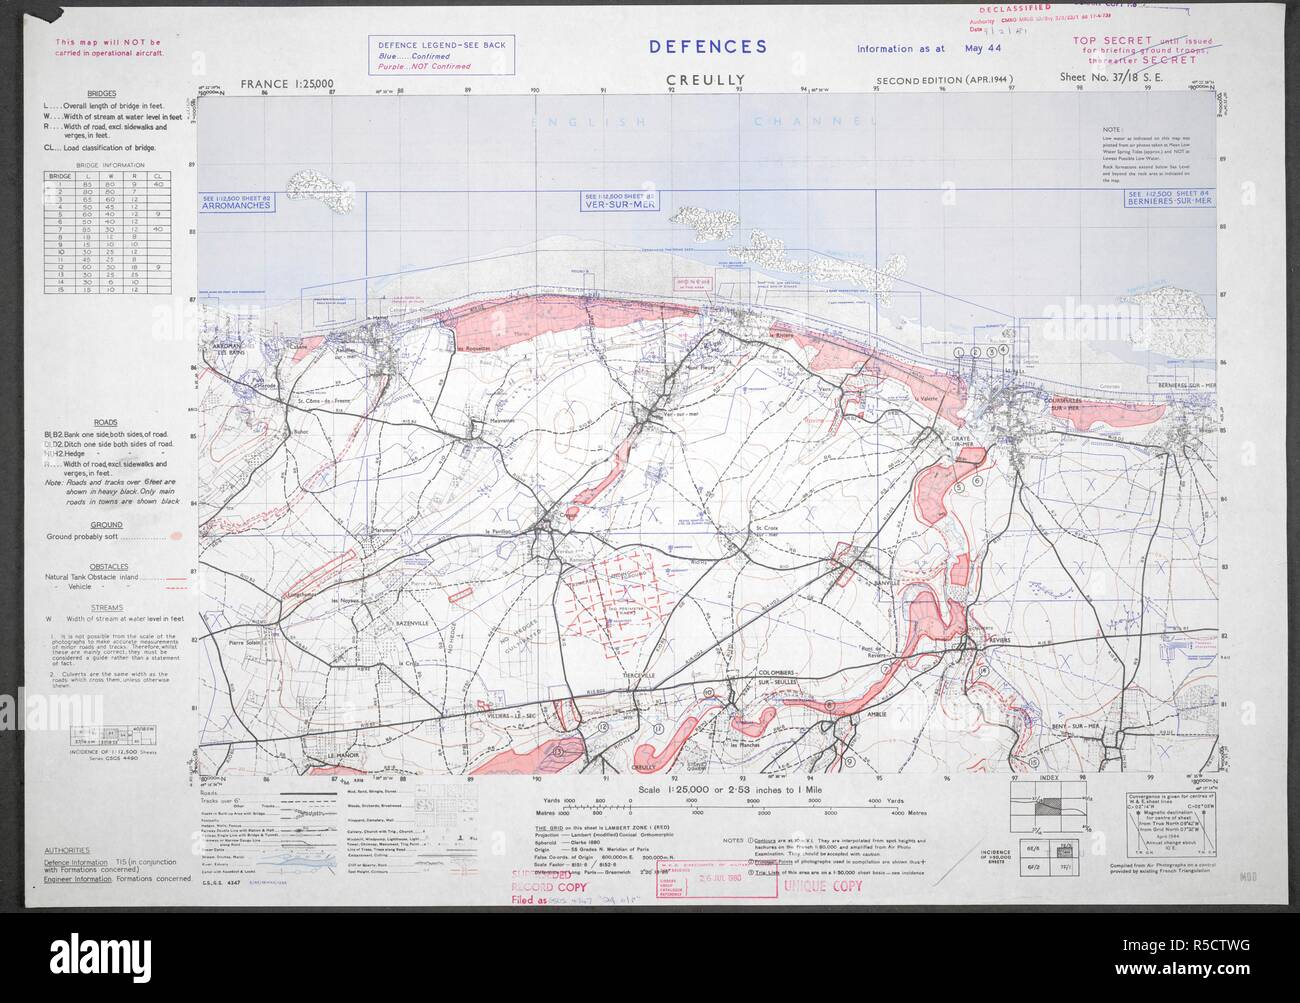 Cruelly village, on the French coast. A map of the Second World War. The 4th/7th Royal Dragoon Guards, were among the first soldiers to land on Gold Beach. The Guards, in amphibious DD Sherman Tanks, arrived five minutes before H-Hour, at 7.20am on June 6 1944. By the end of the day of fierce fighting they had liberated Creully. France 1:25,000 Defences, Bigot. [London] : War Office, 1944. Source: Maps 14317.(259.) 37/18 SE. Stock Photo